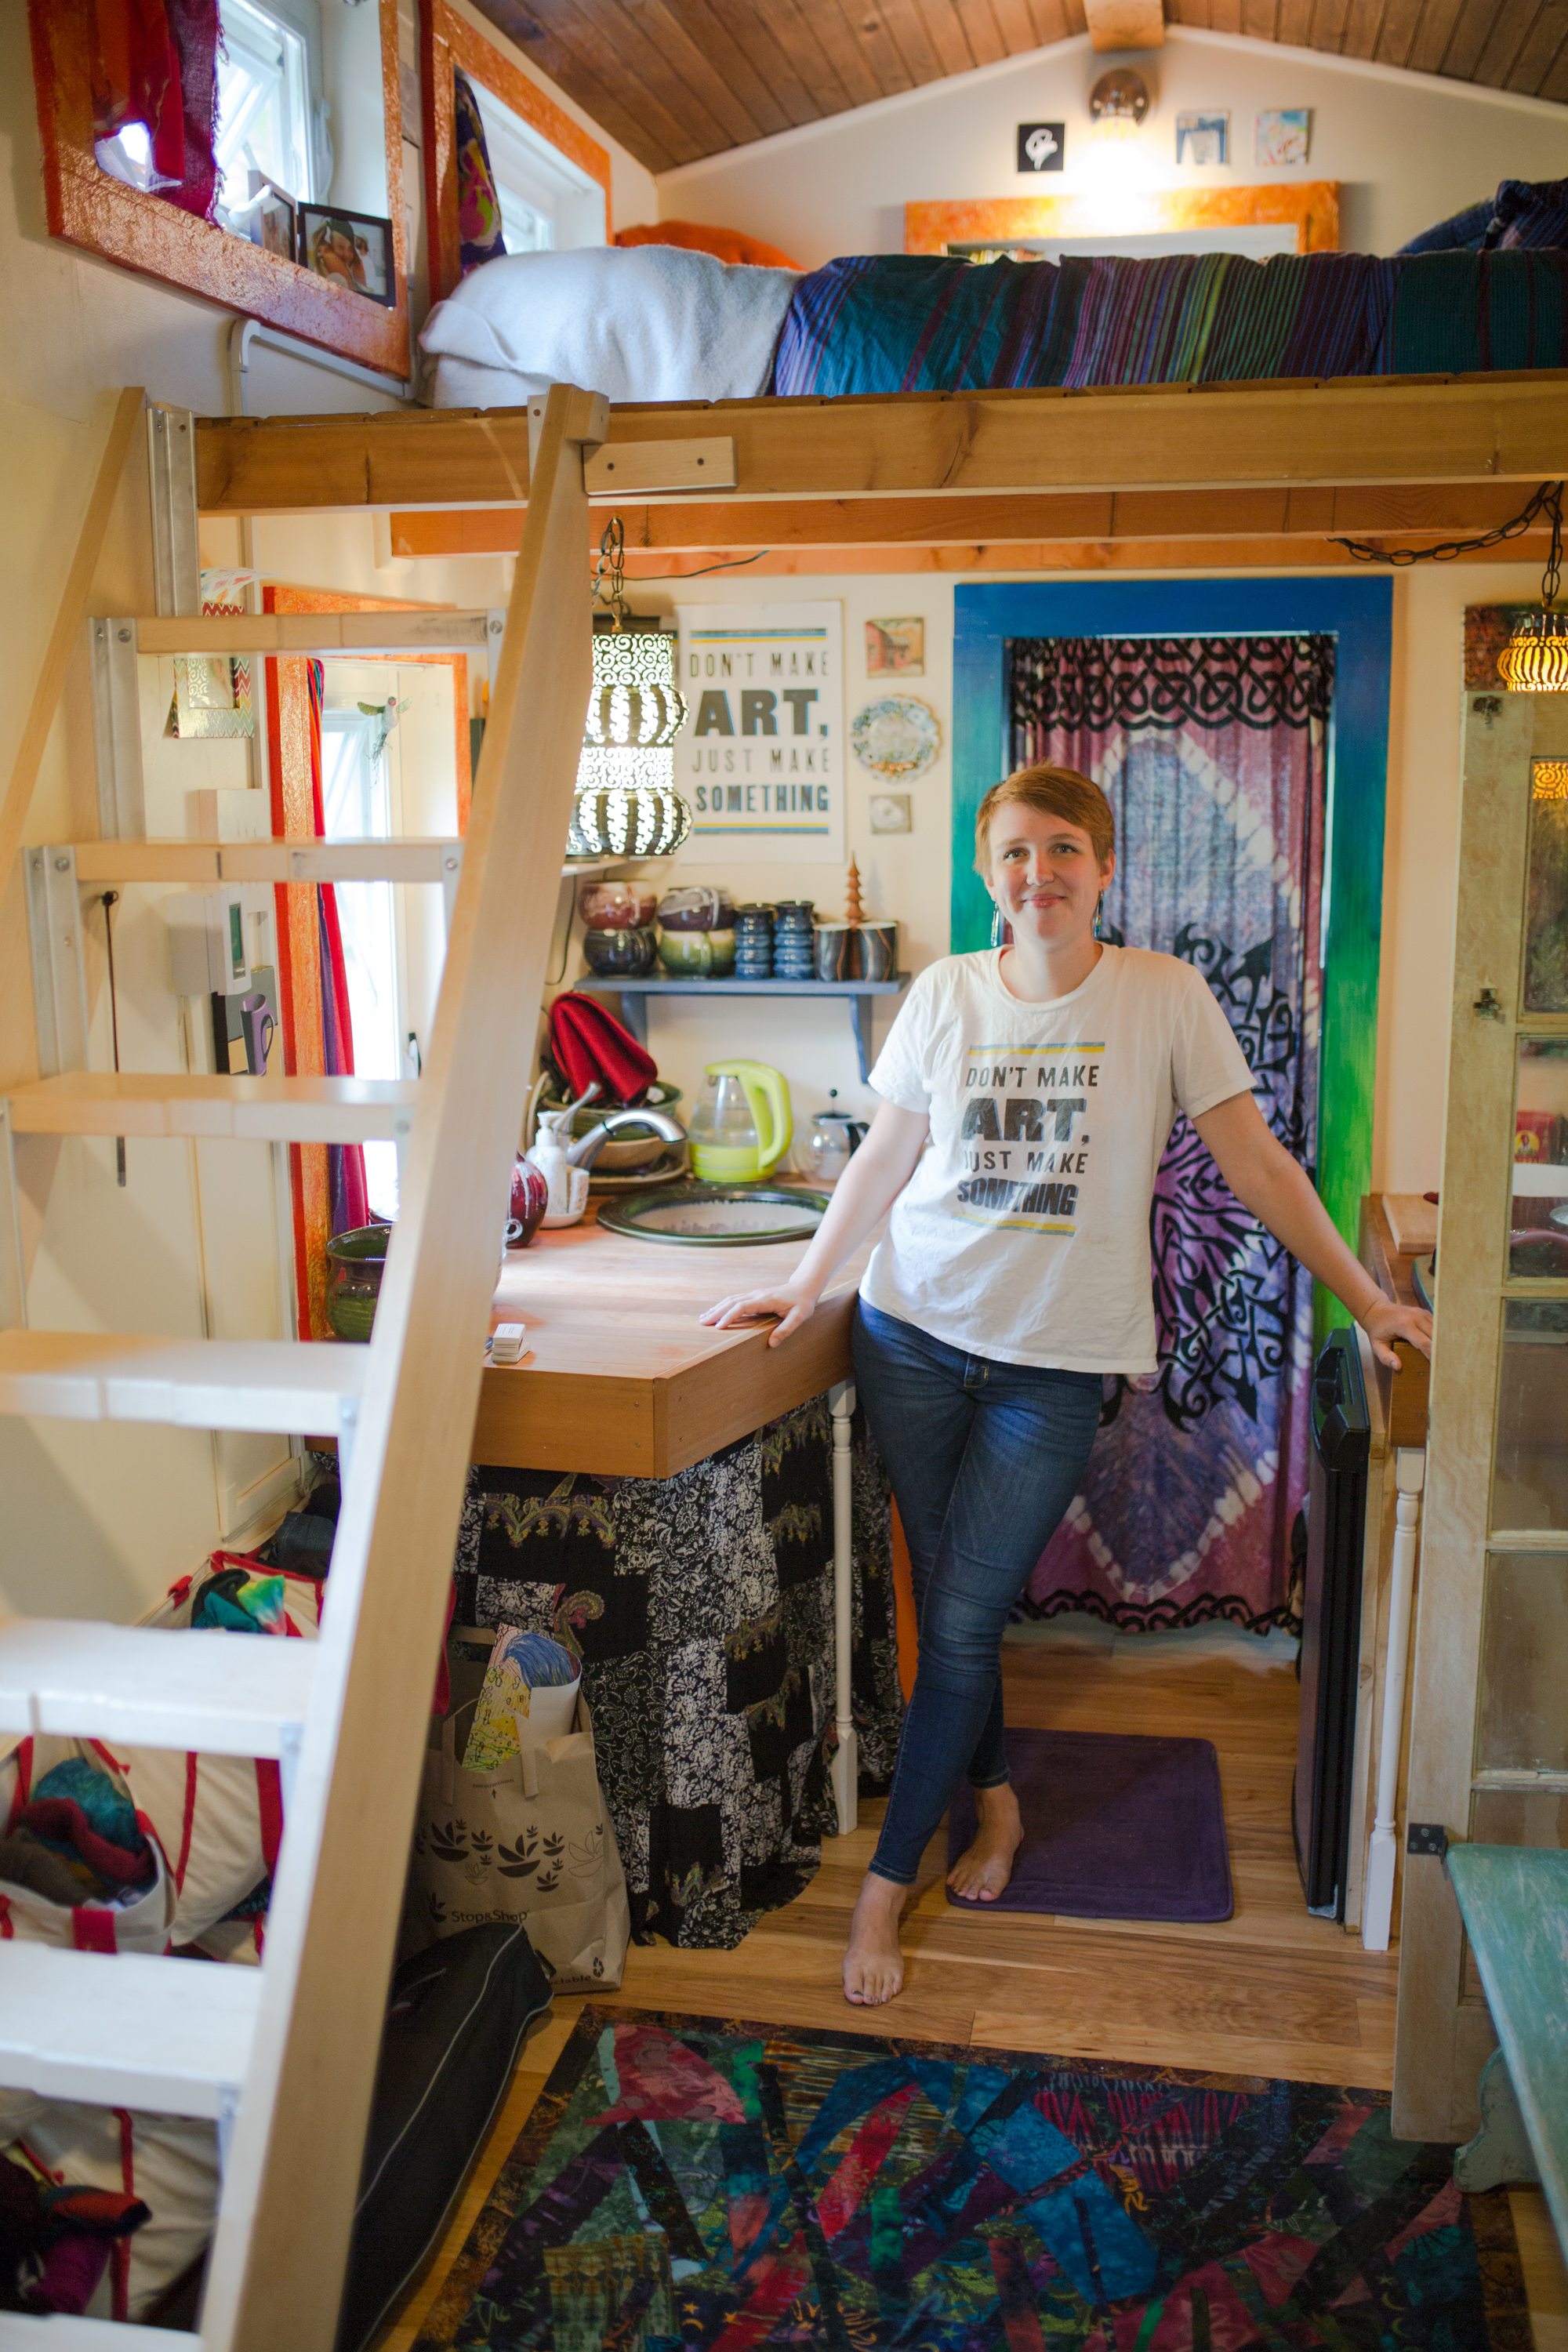 Miranda Aisling stands in the kitchen of her tiny house. Above her is her loft bedroom.